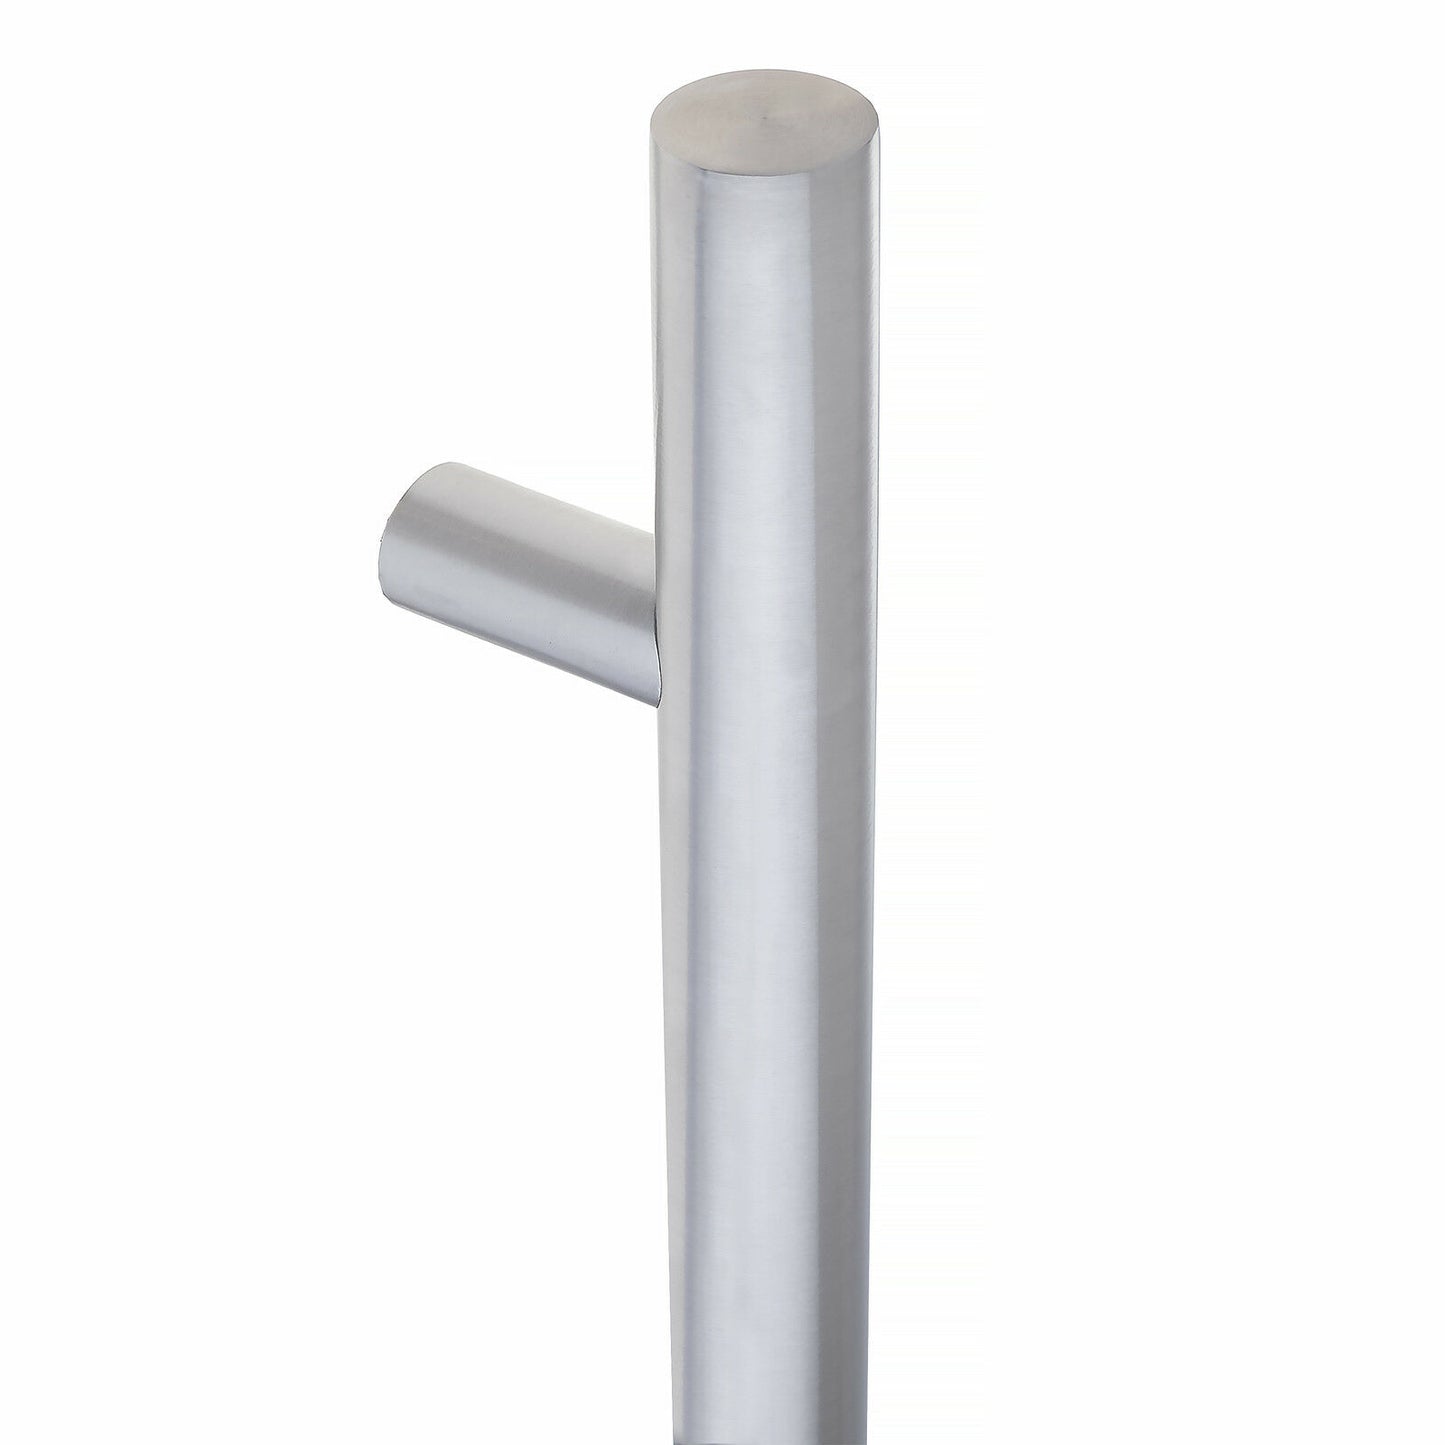 Pair Of Satin Stainless Steel Straight T Bar Guardsman Pull Handles 600 x 19mm